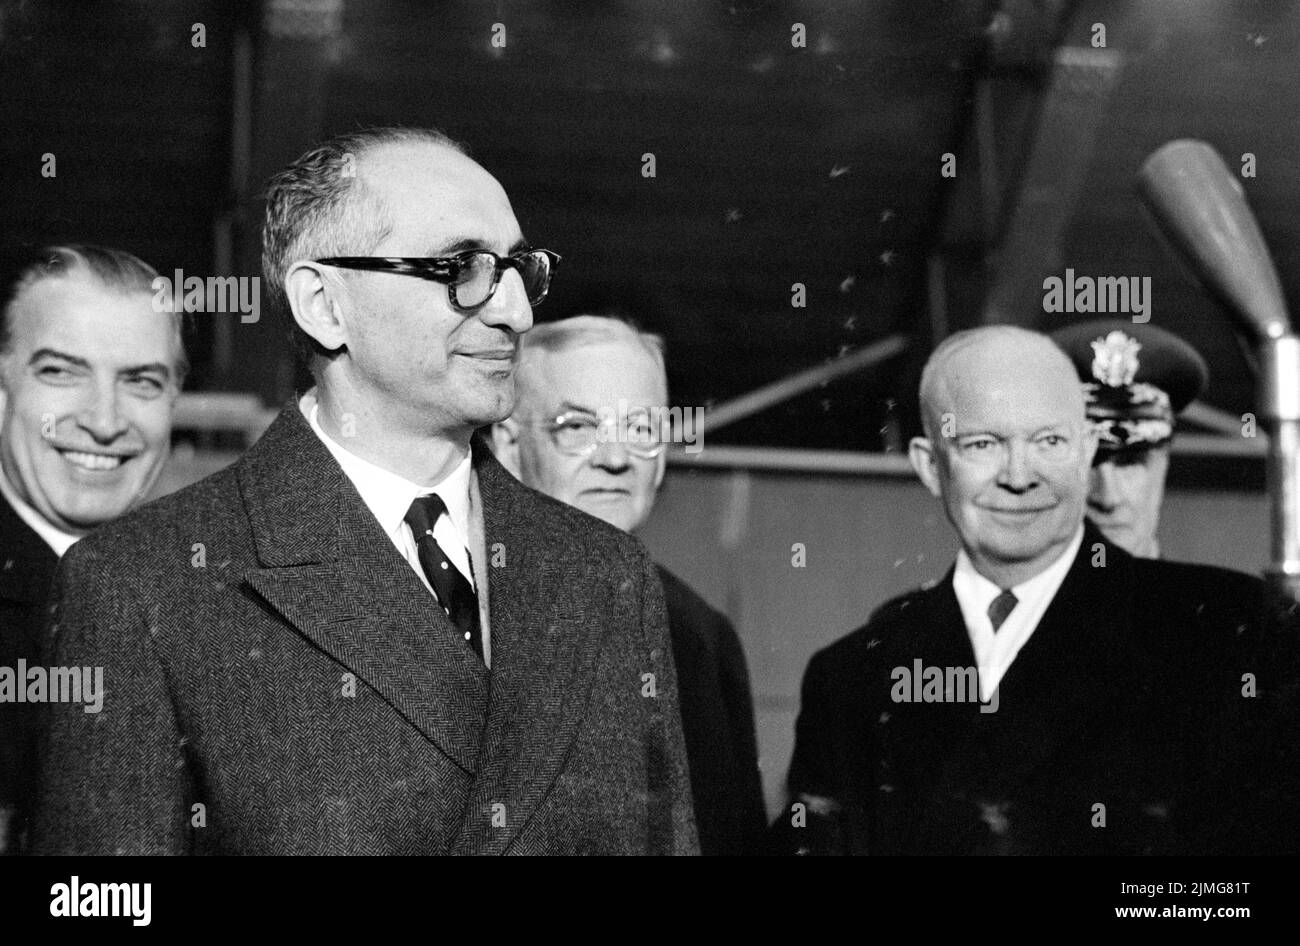 Arturo Frondizi, President of Argentina, with U.S. President Dwight Eisenhower and others during his arrival in Washington, D.C., USA, Marion S. Trikosko, U.S. News & World Report Magazine Photograph Collection, January 19, 1959 Stock Photo